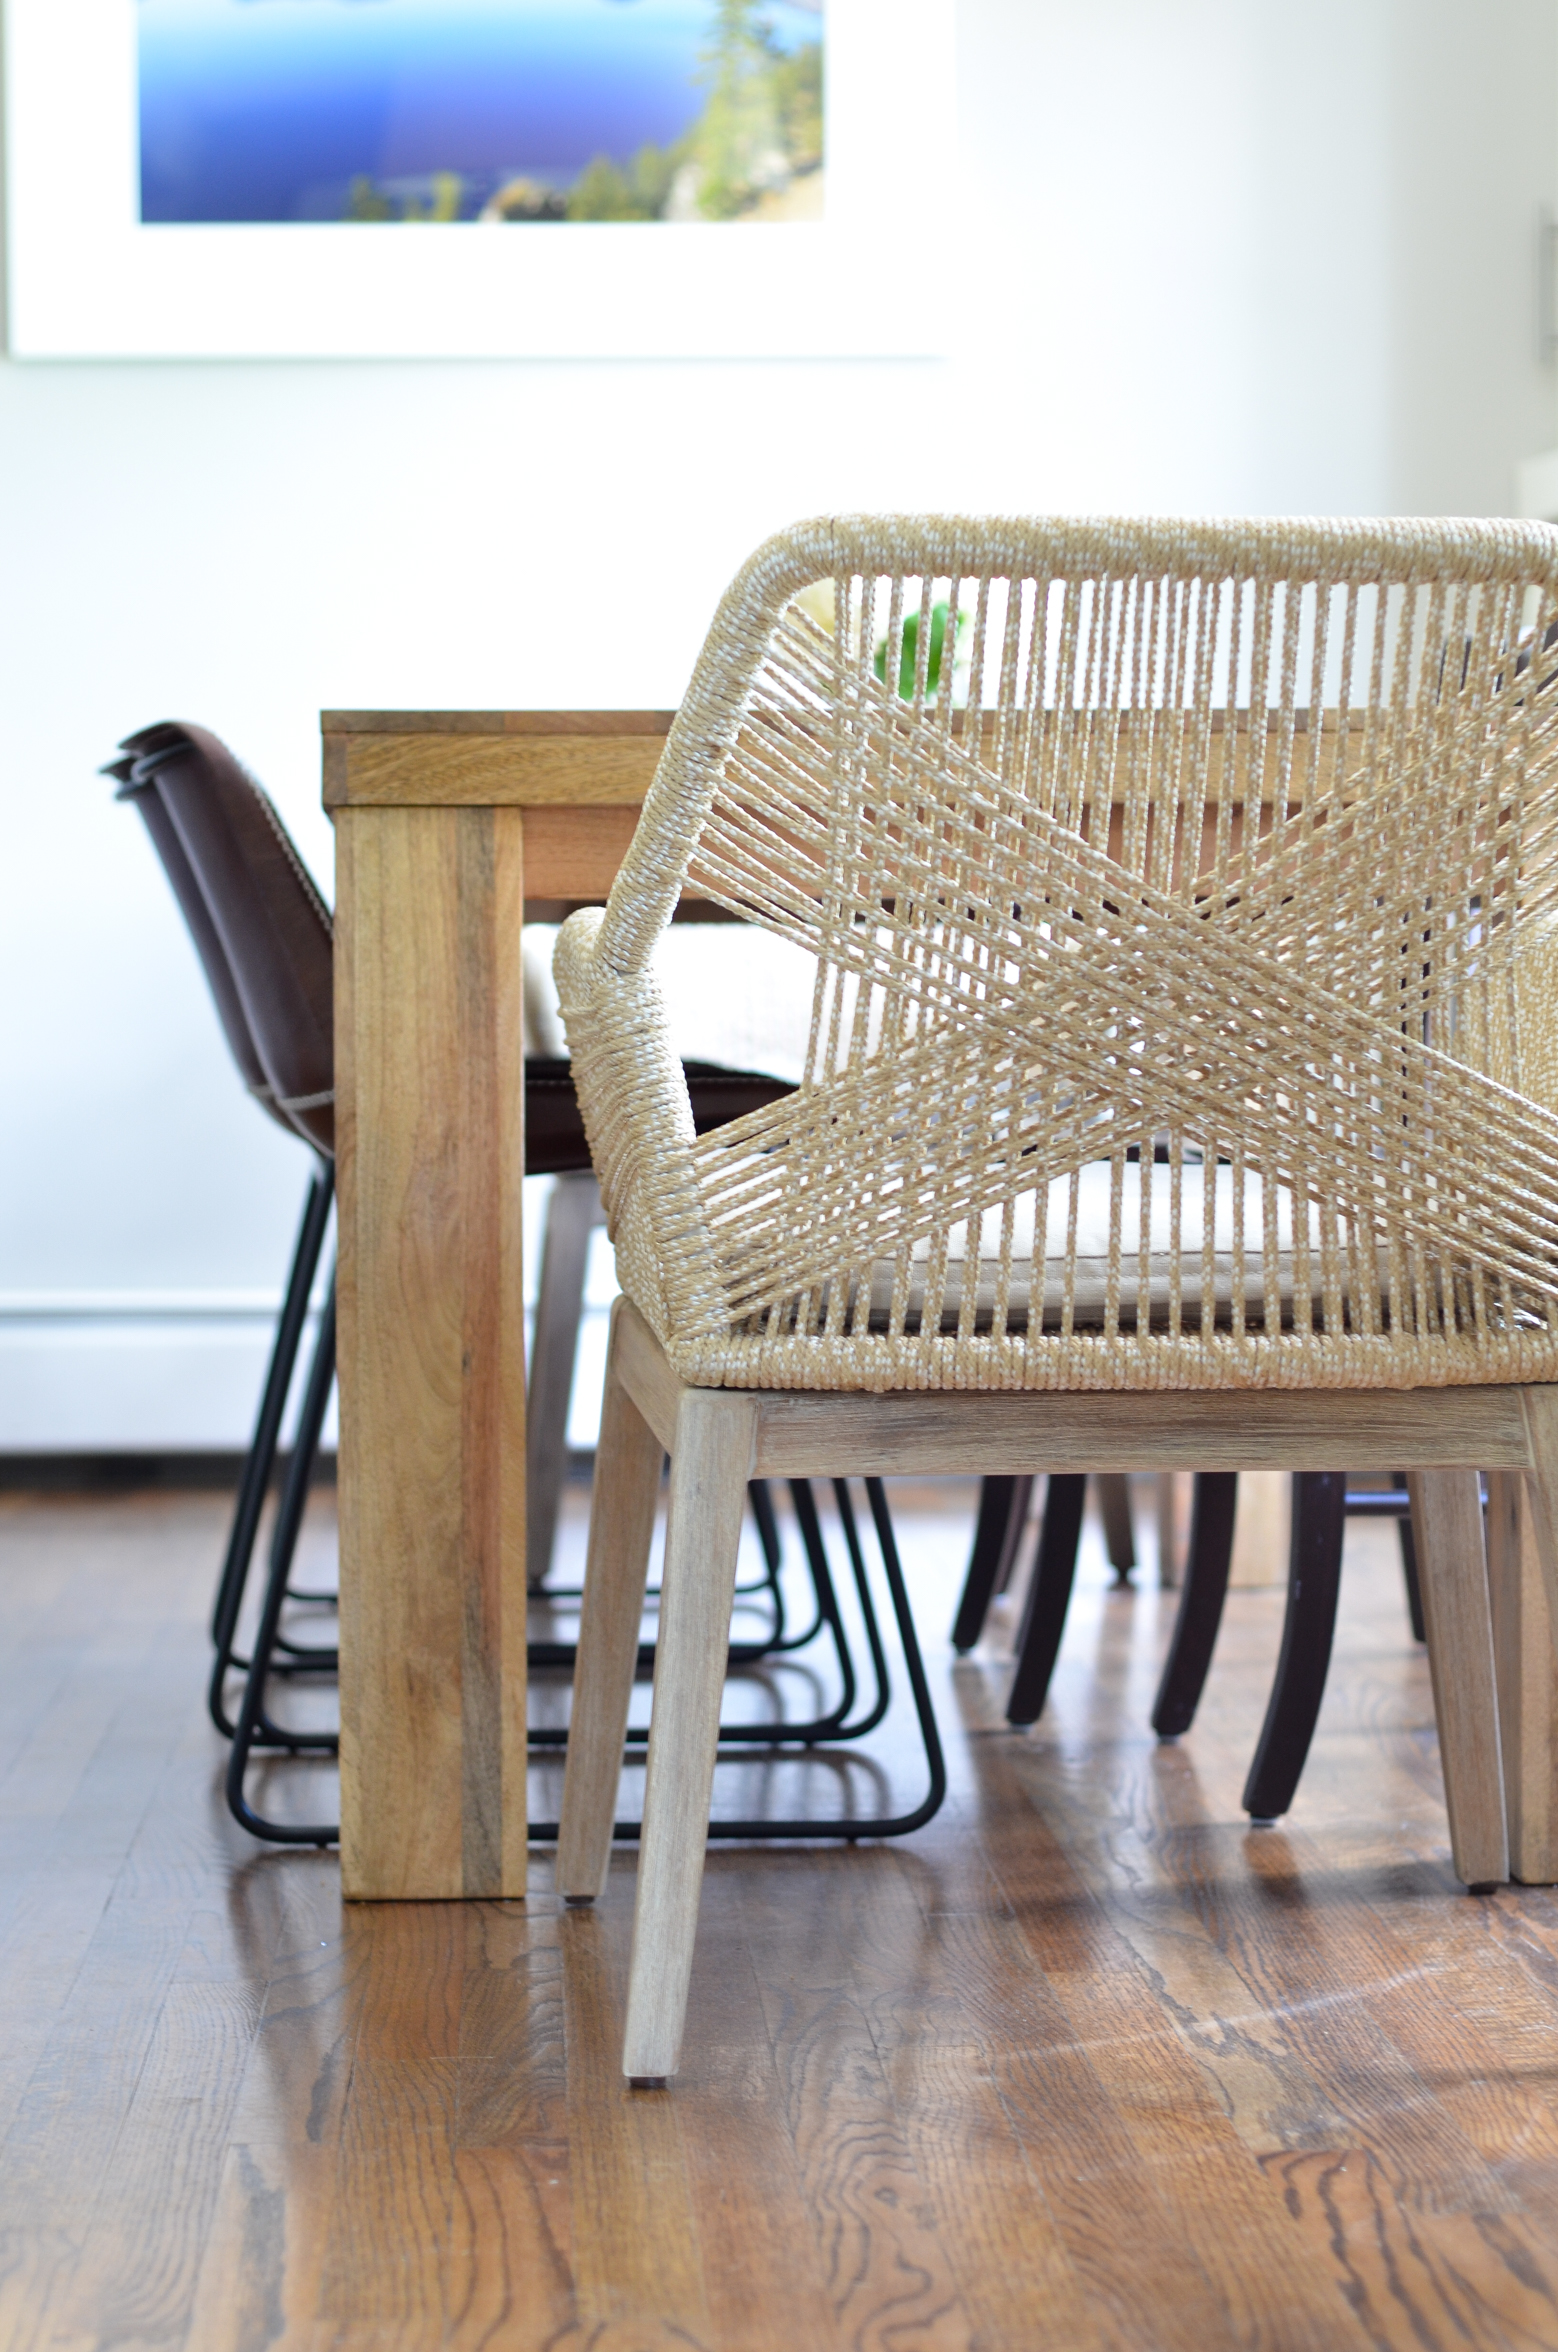 Beige Rope Chairs - Breakfast Nook Project - The Chronicles of Home